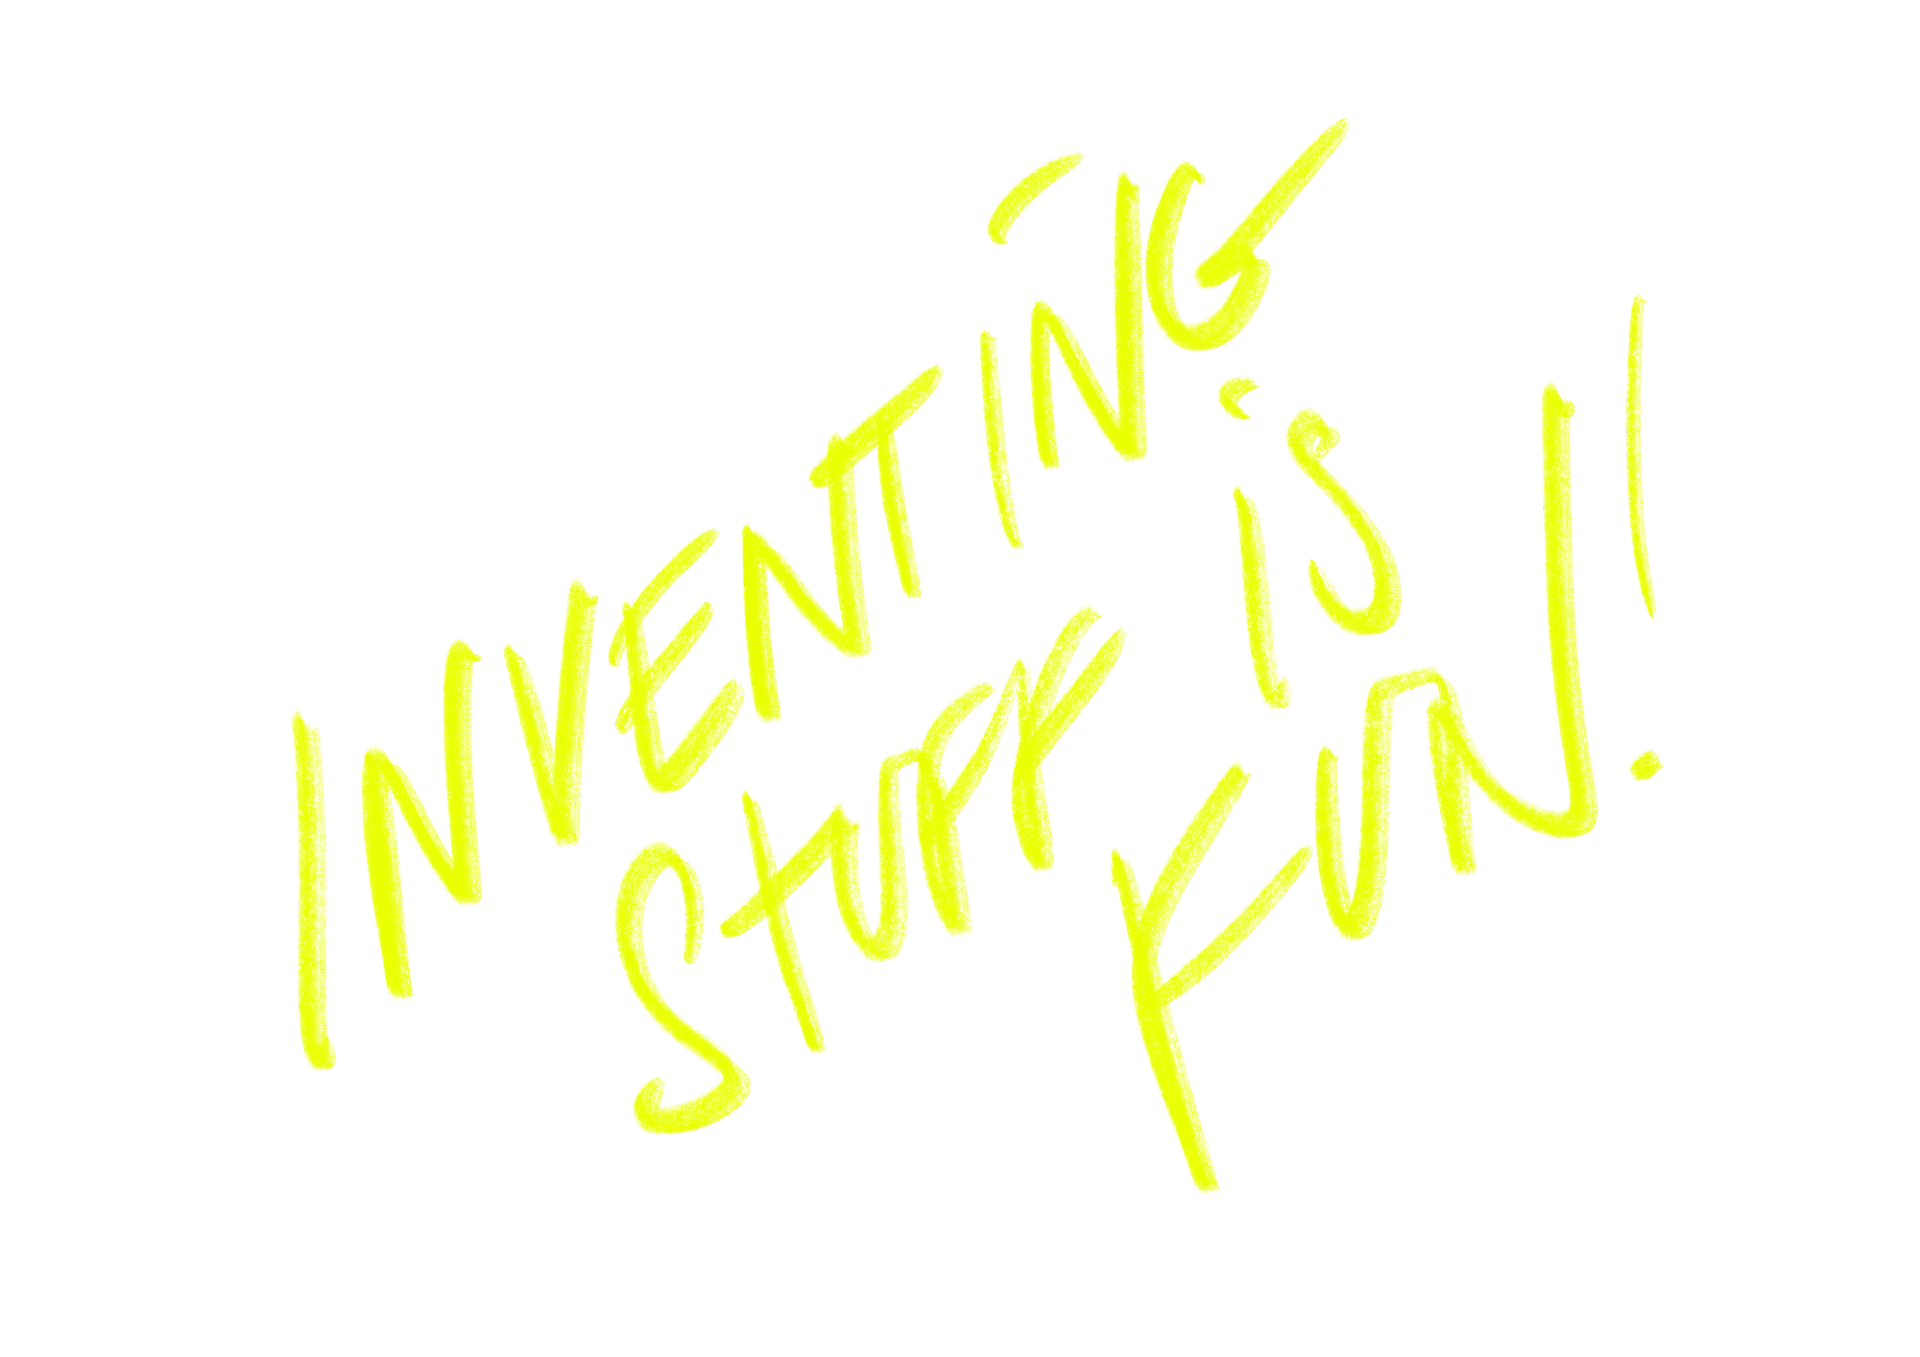 Inventing stuff is fun products coming soon